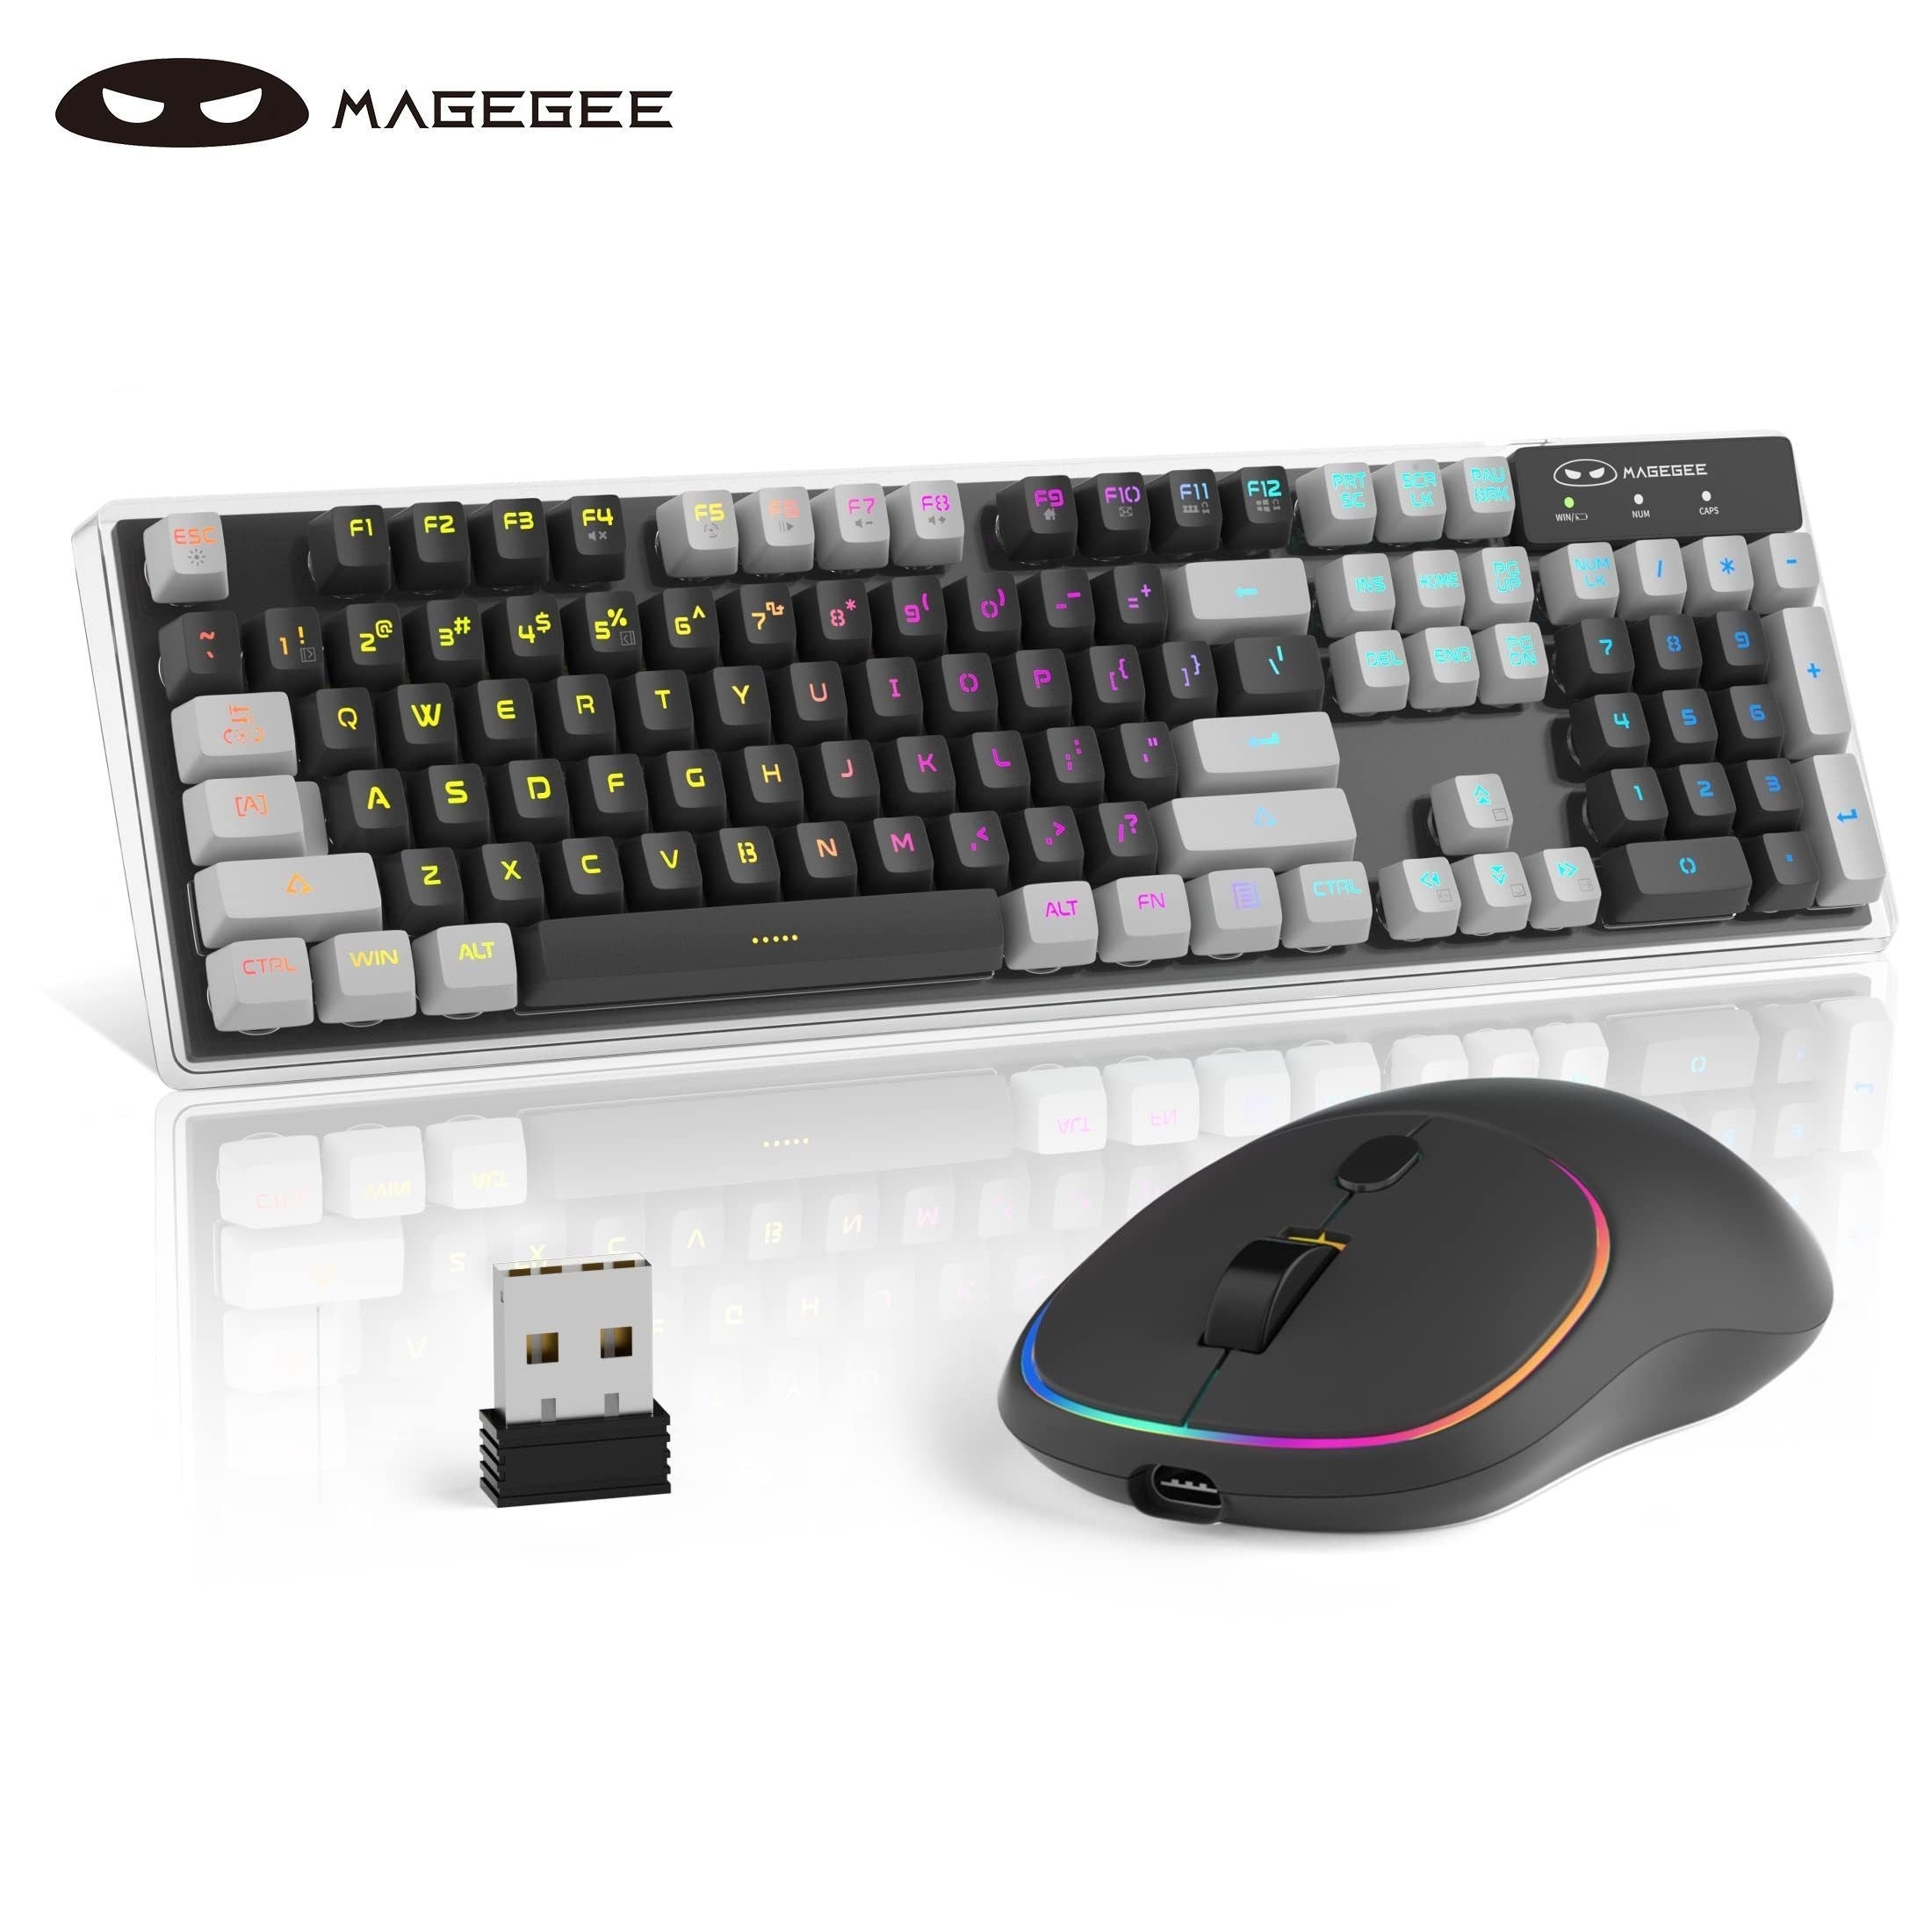 Upgrade Your Gaming Experience with the MageGee V550 Wireless Keyboard & Mouse Combo!